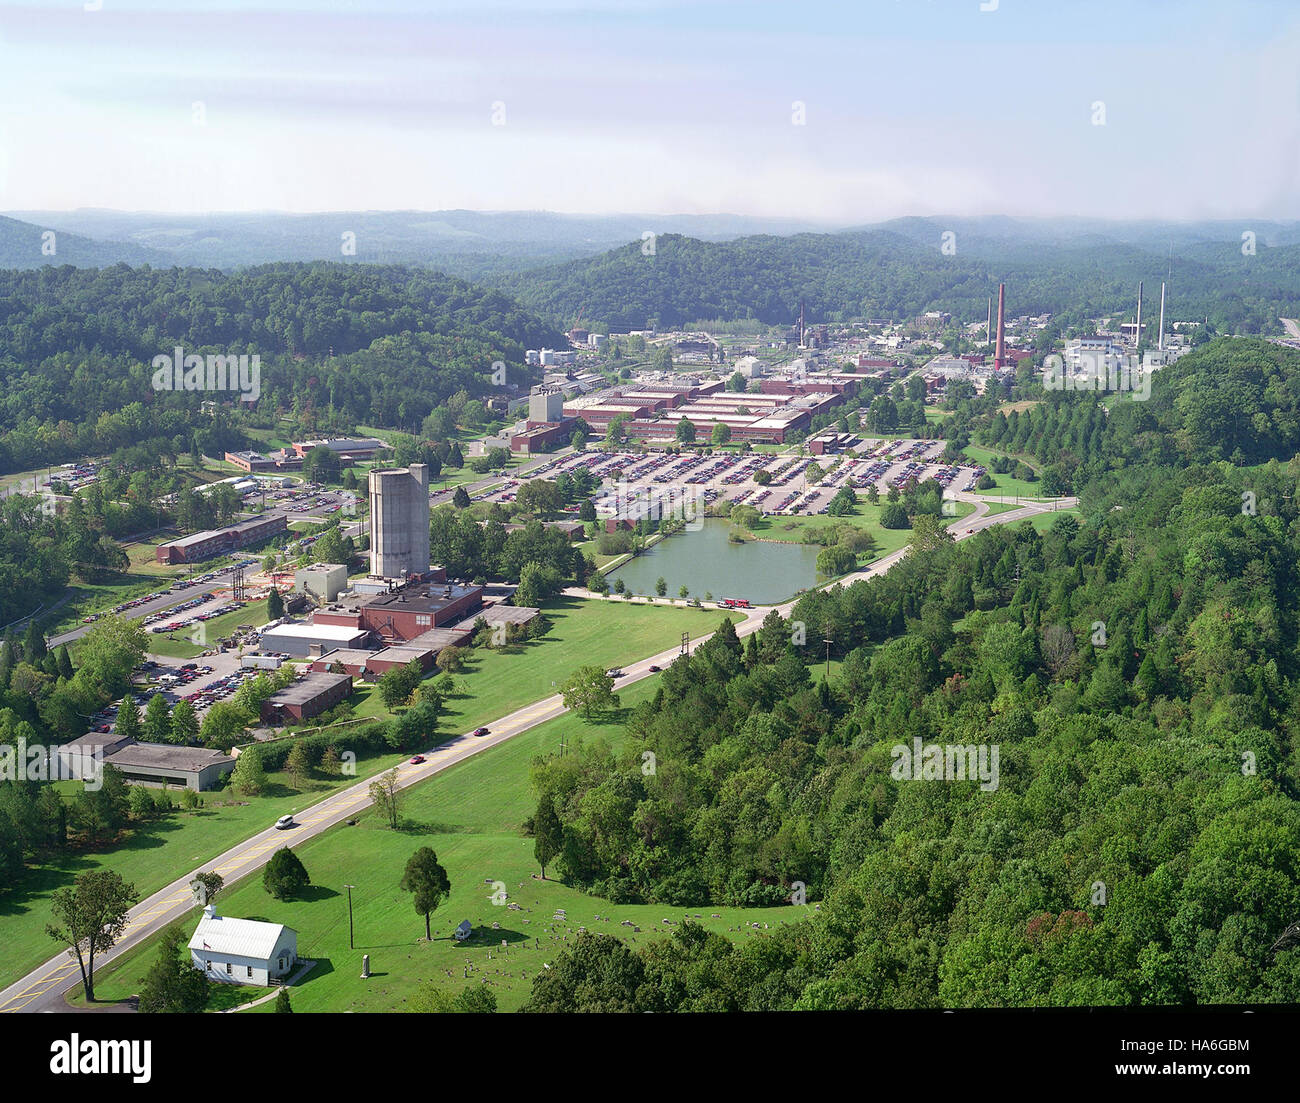 Ornl High Resolution Stock Photography and Images - Alamy